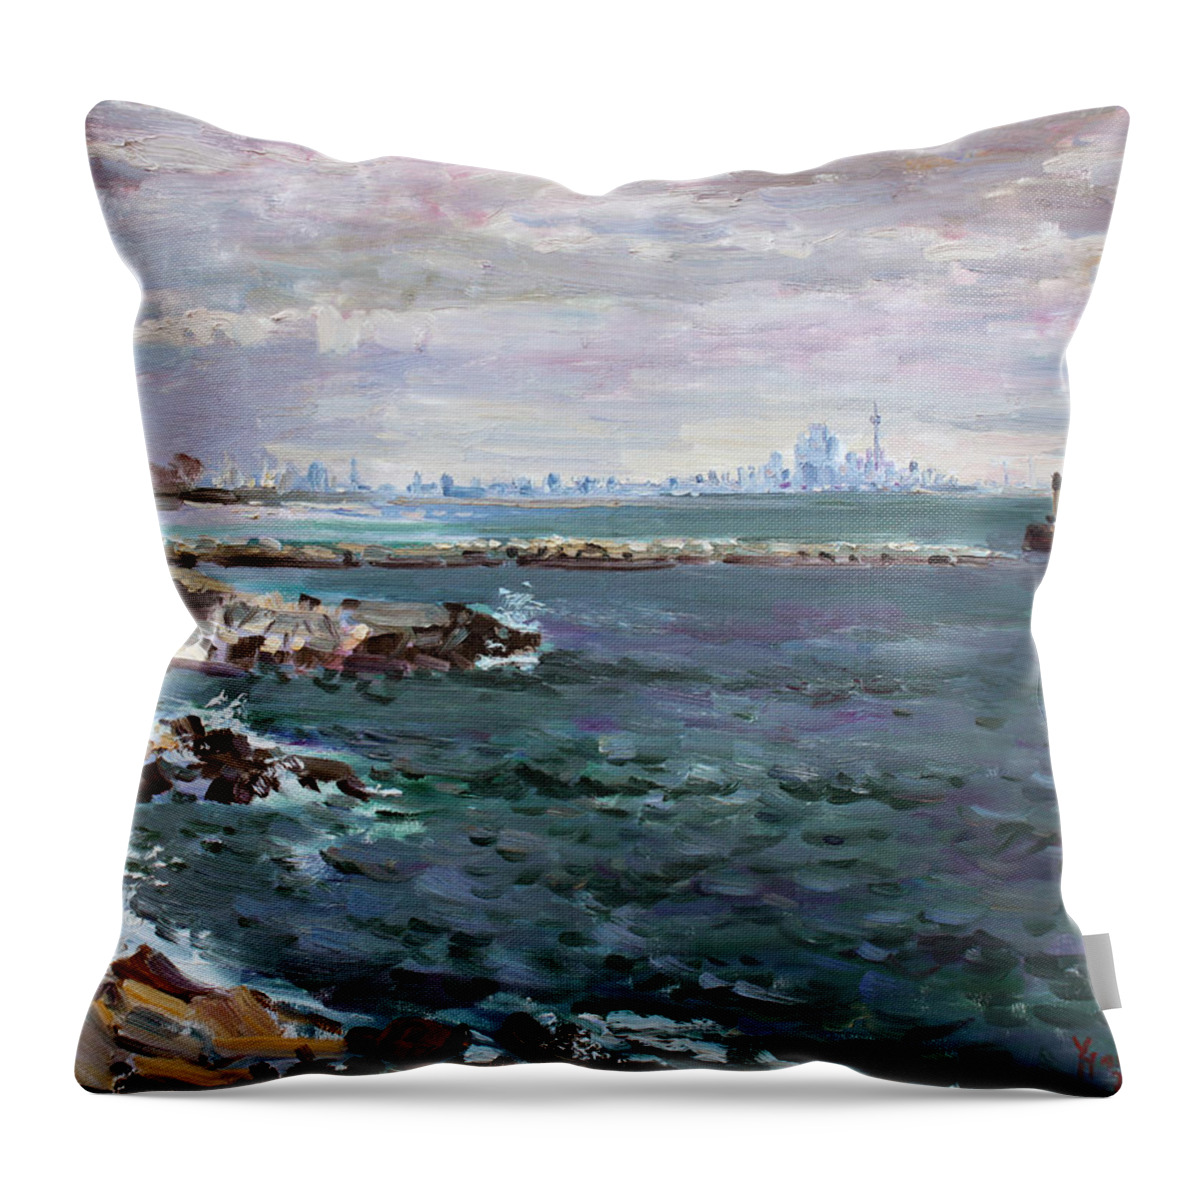 Mississauga Throw Pillow featuring the painting By Lakeshore Mississauga by Ylli Haruni